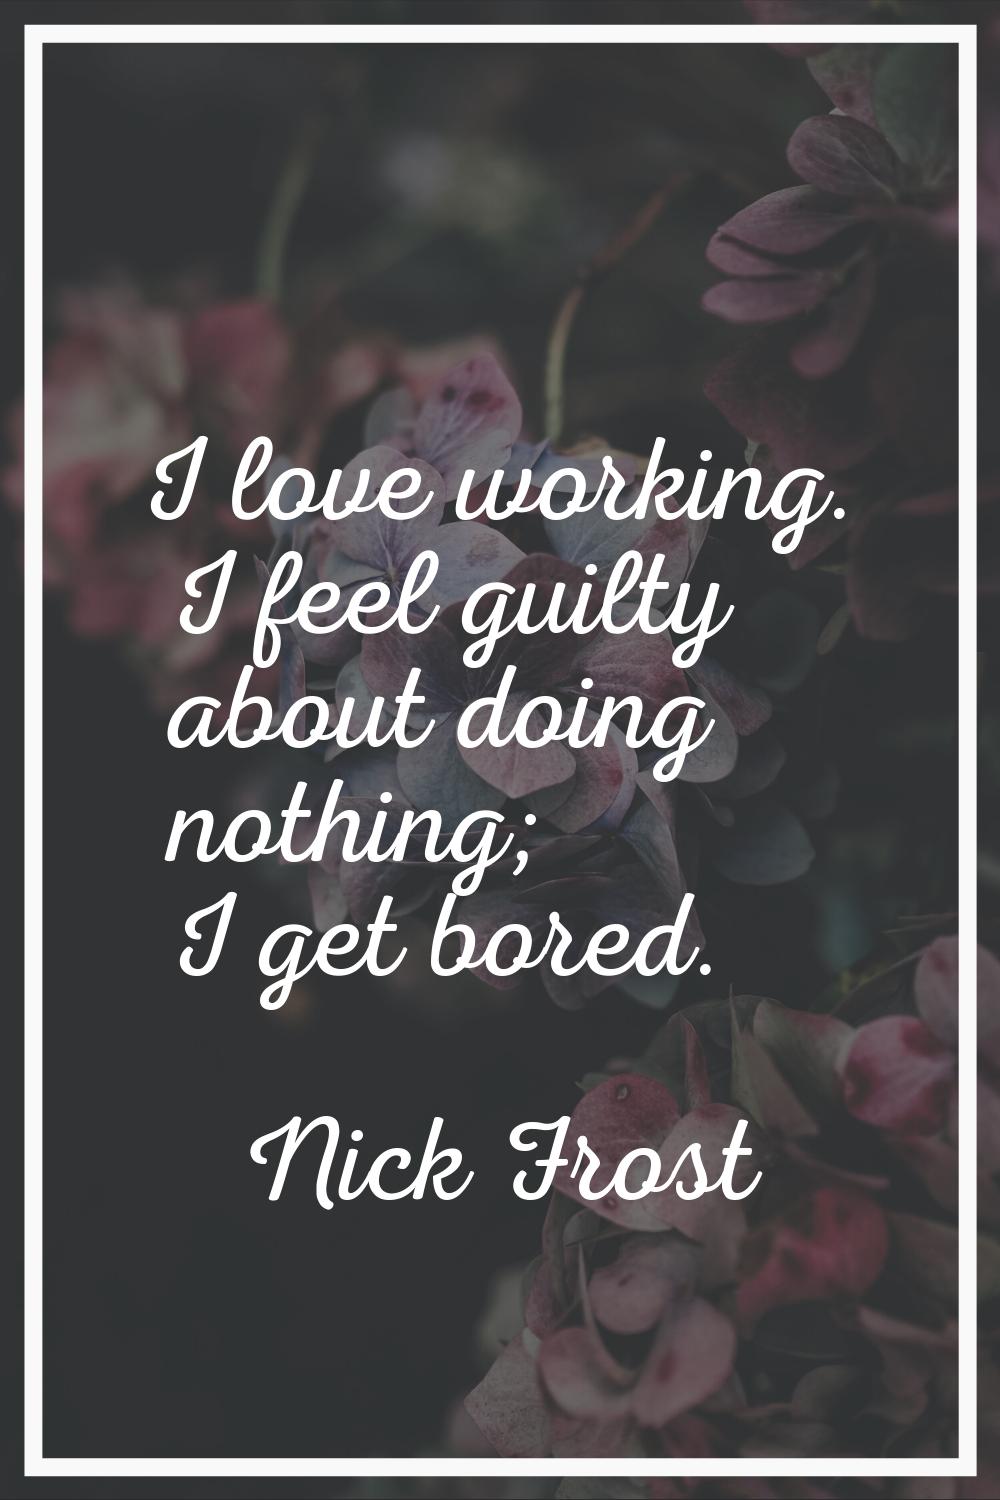 I love working. I feel guilty about doing nothing; I get bored.